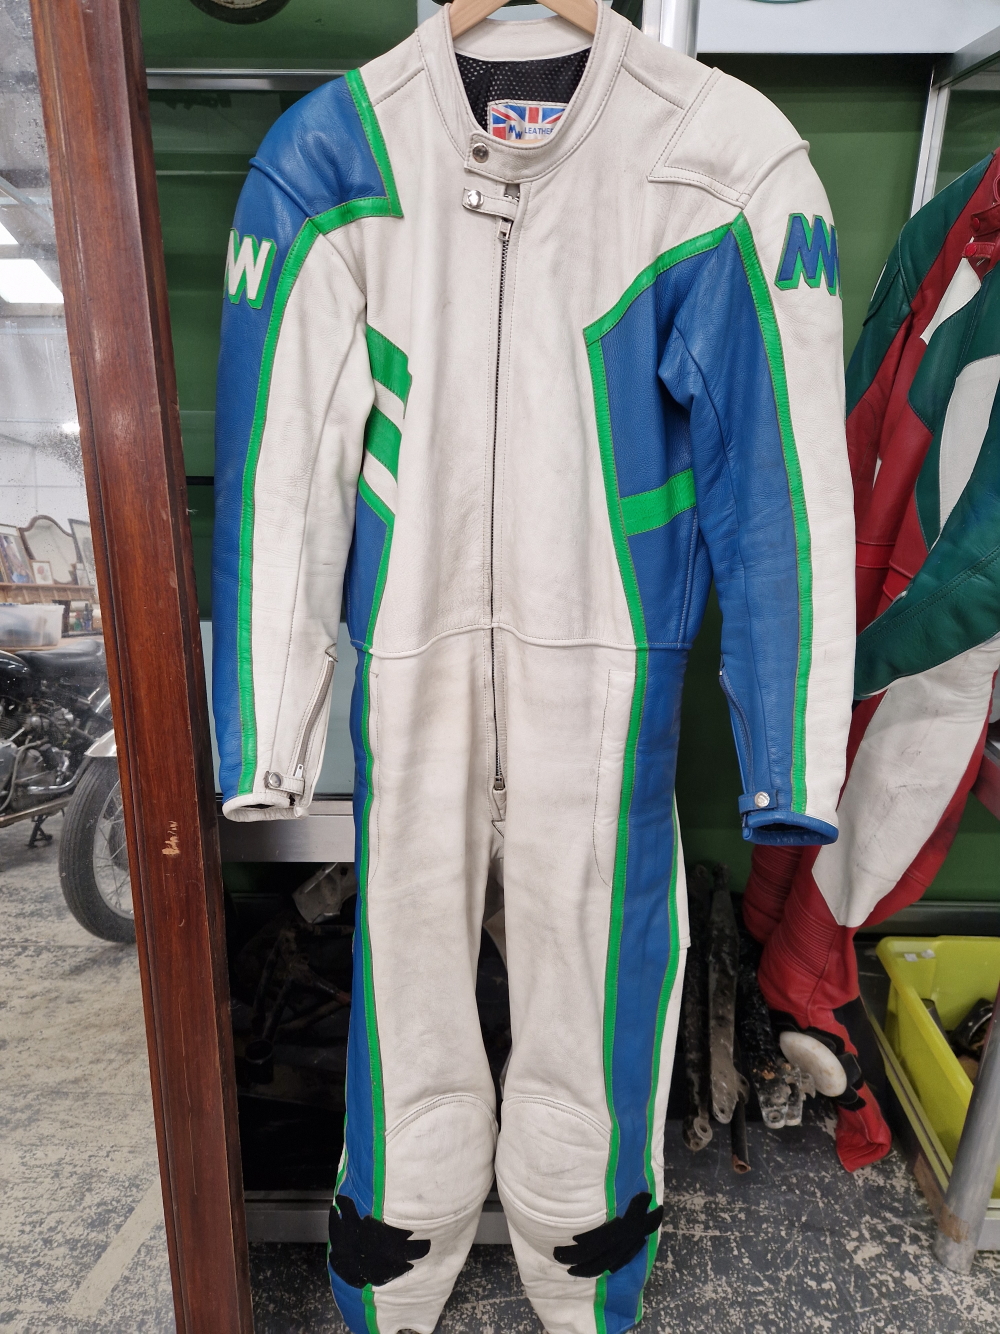 VINTAGE MIKE WILLIS MW LEATHERS. MOTORCYCLE RACING ONE PIECE SUIT, BLUE VIVID GREEN AND WHITE.